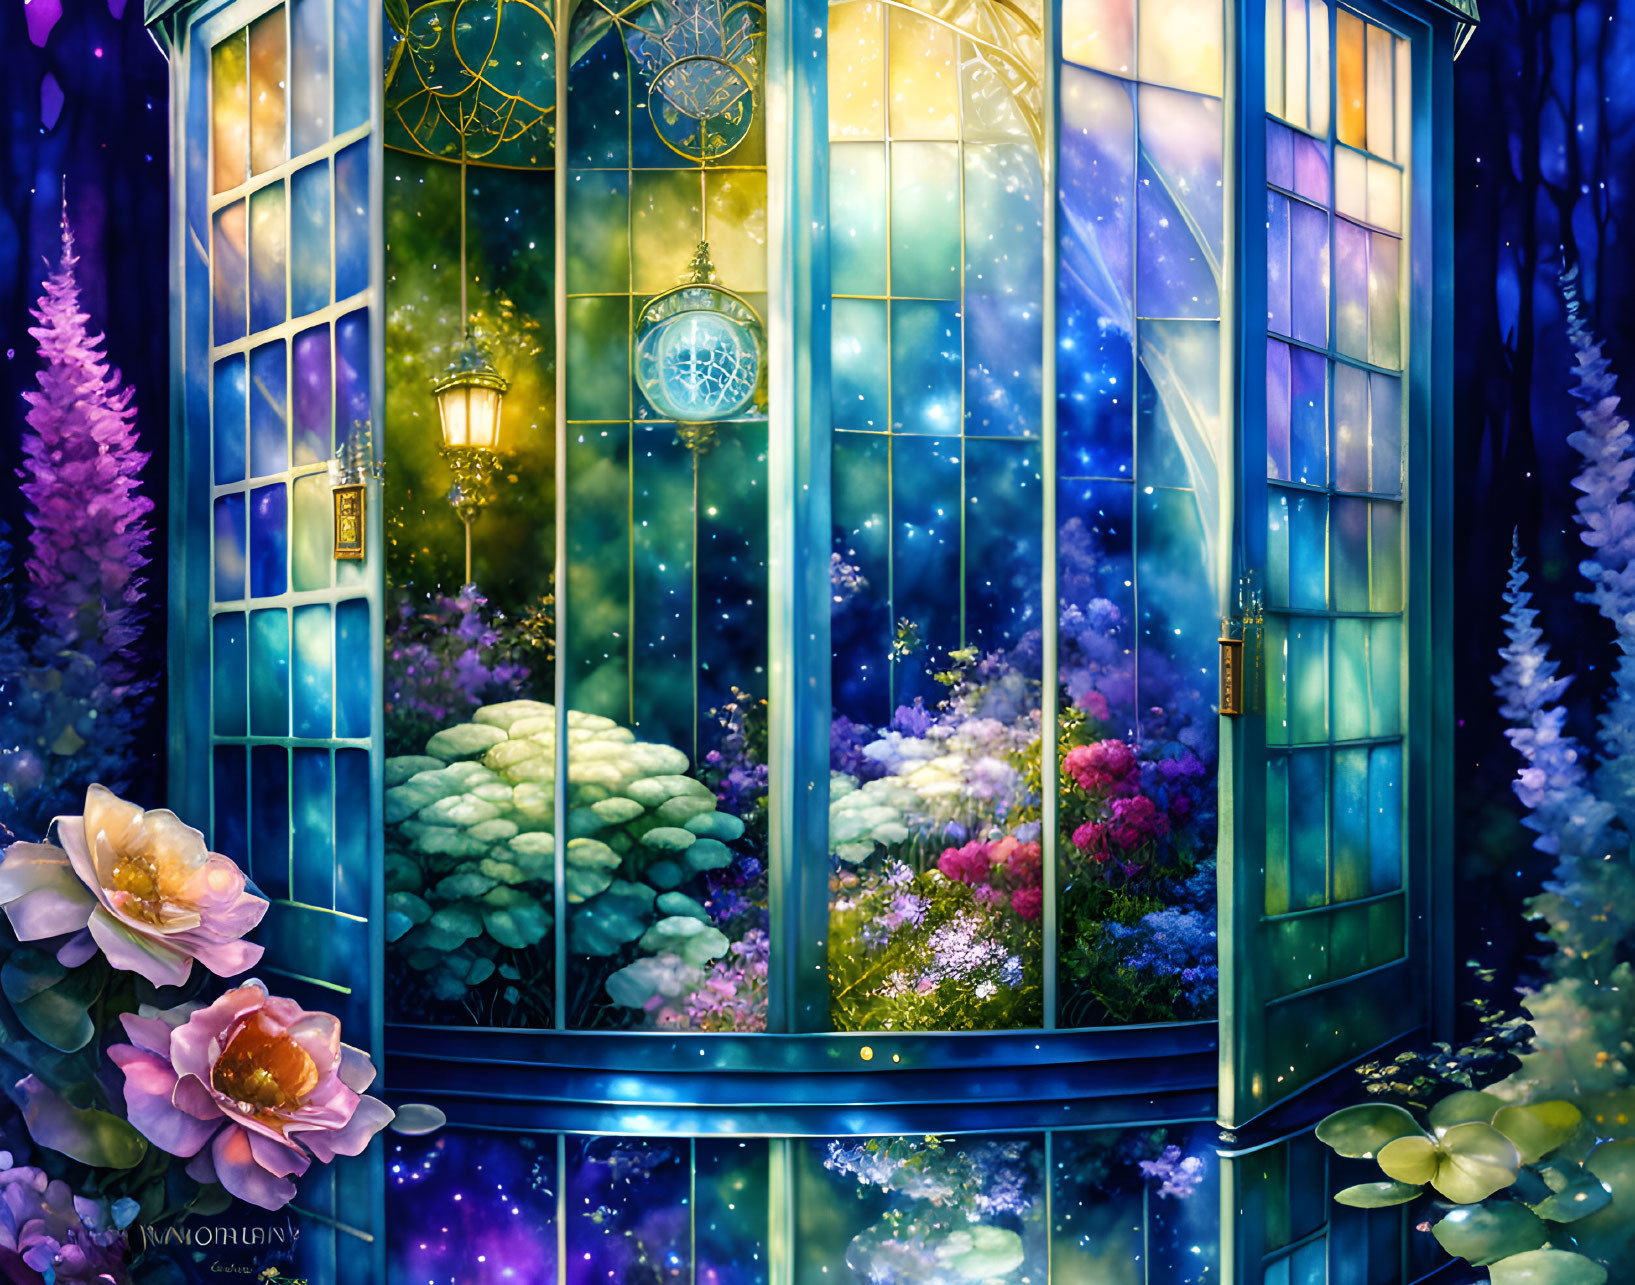 Illustration: Whimsical magical conservatory with vibrant flowers and glowing lanterns.